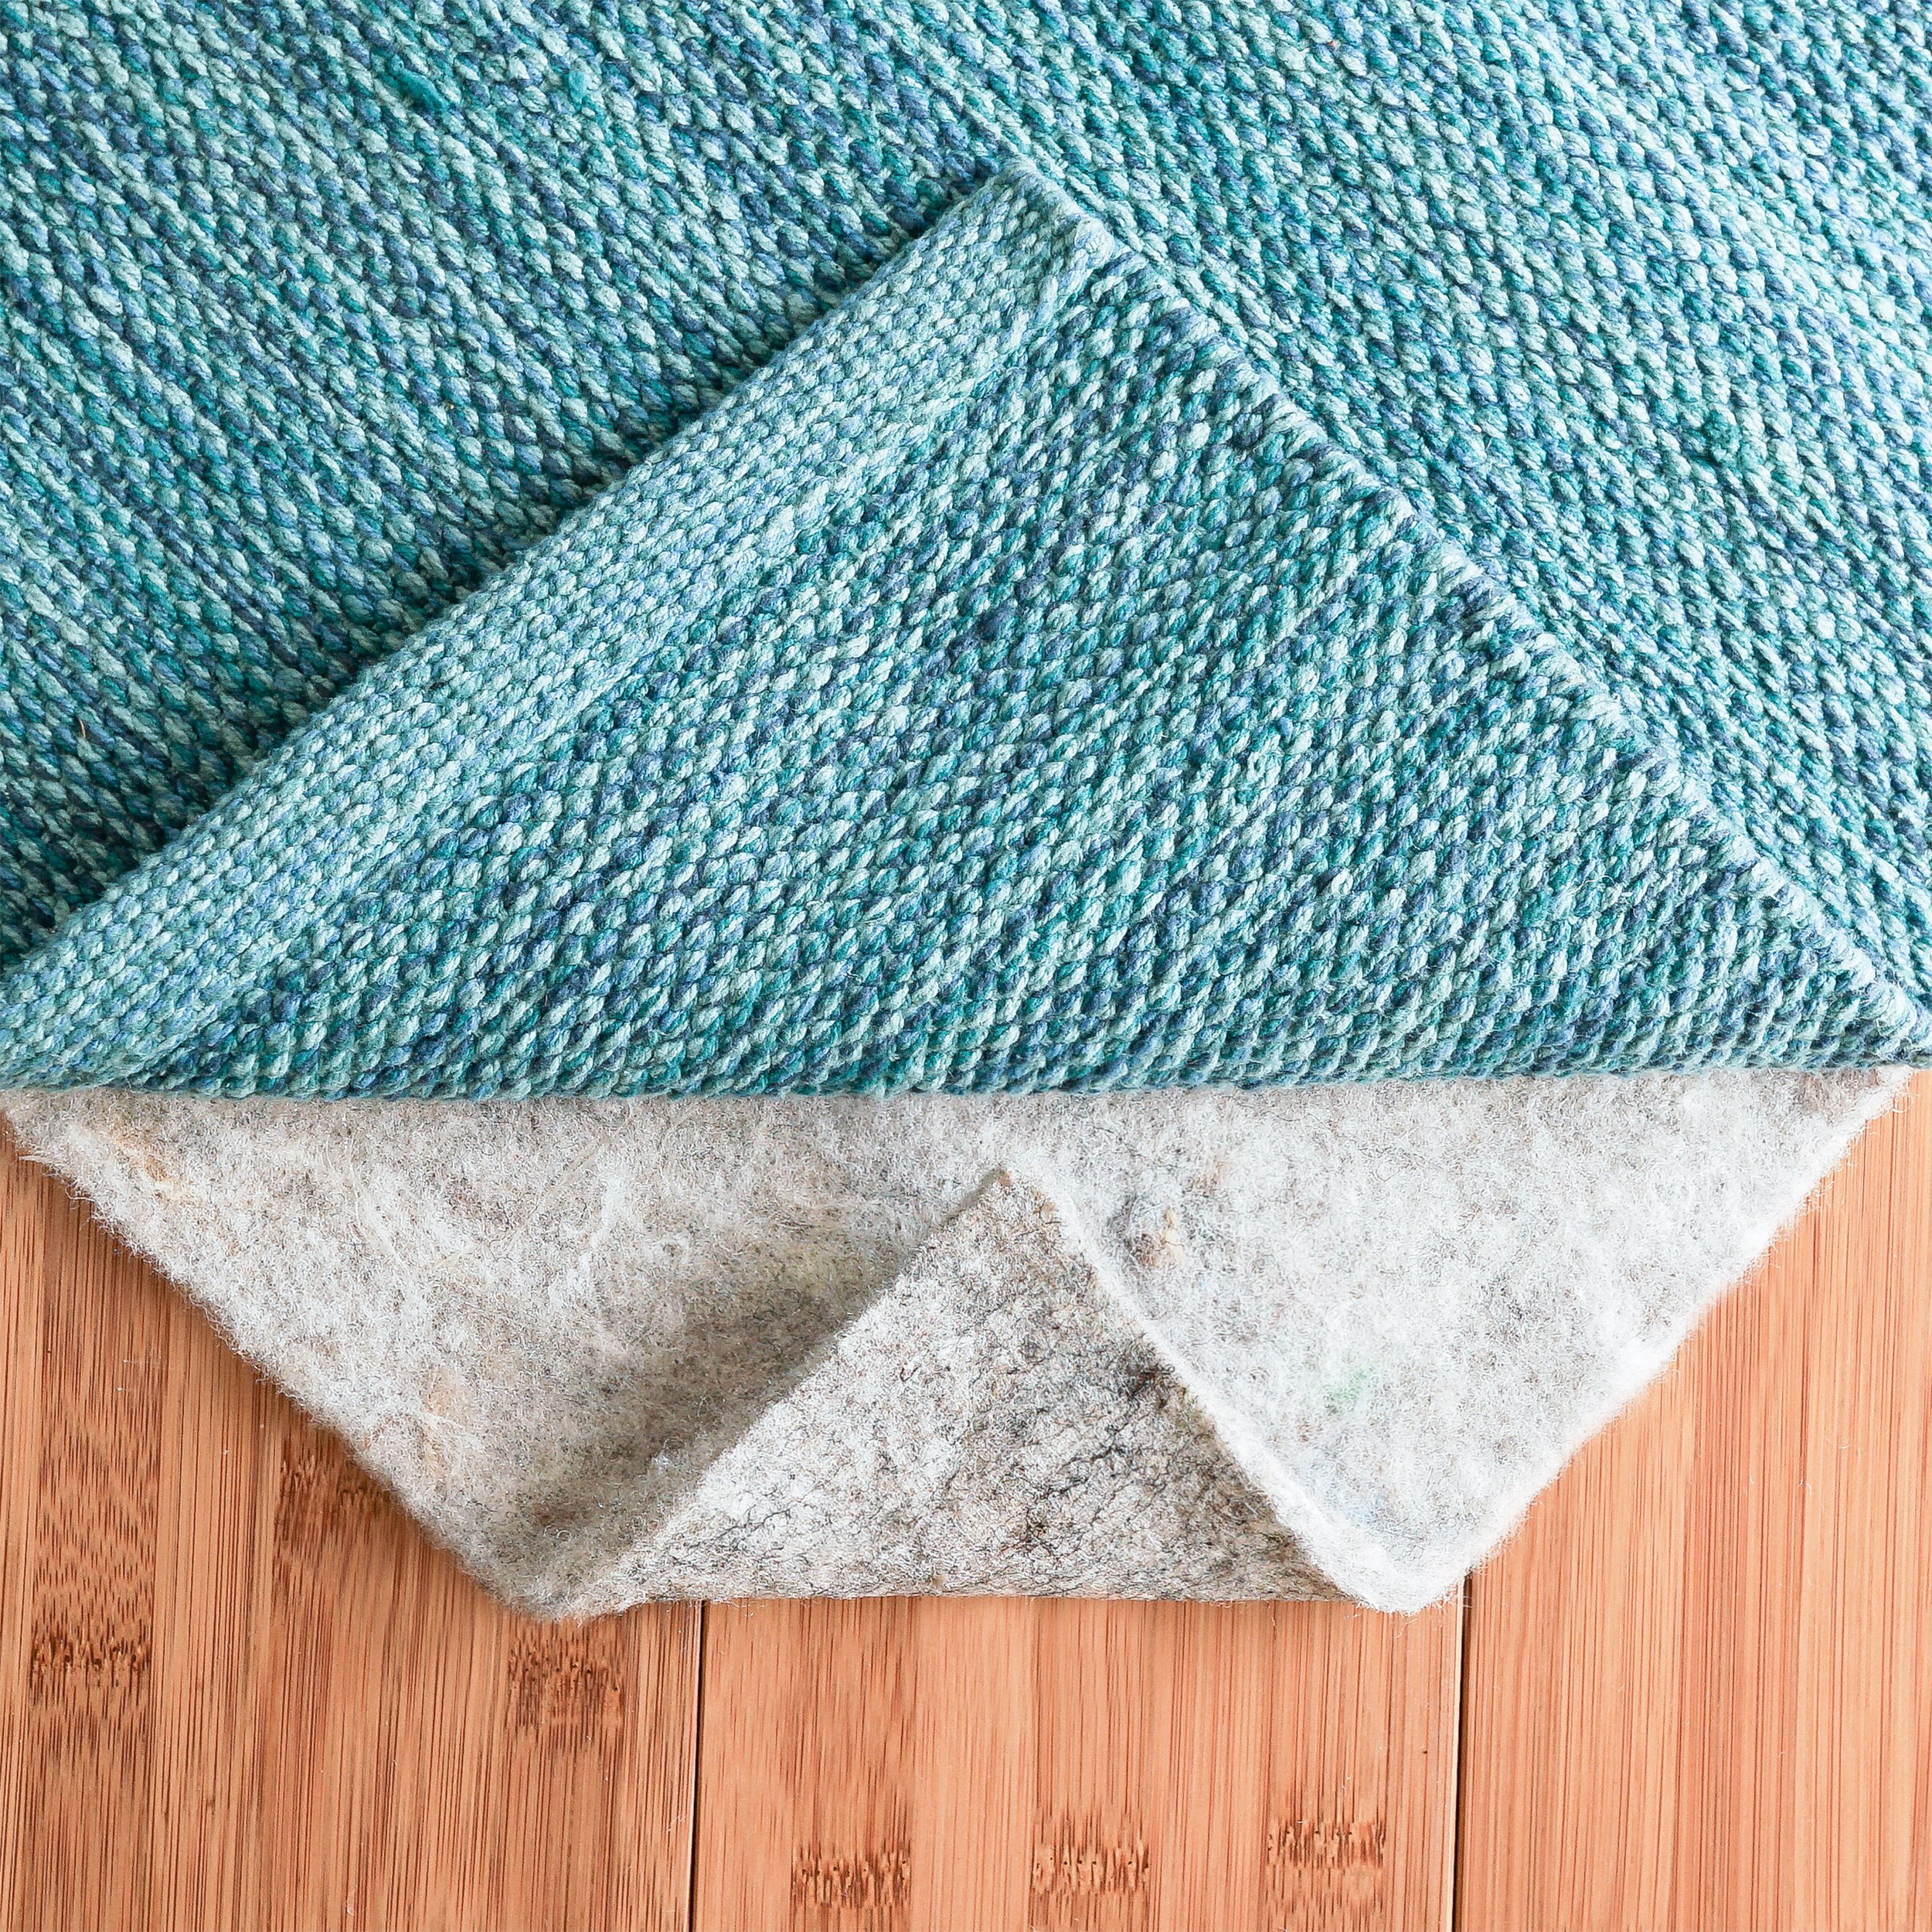 RugPadUSA Essentials 7 ft. x 9 ft. Rectangle Felt + Rubber Non-Slip 1/4 in. Thick Rug Pad